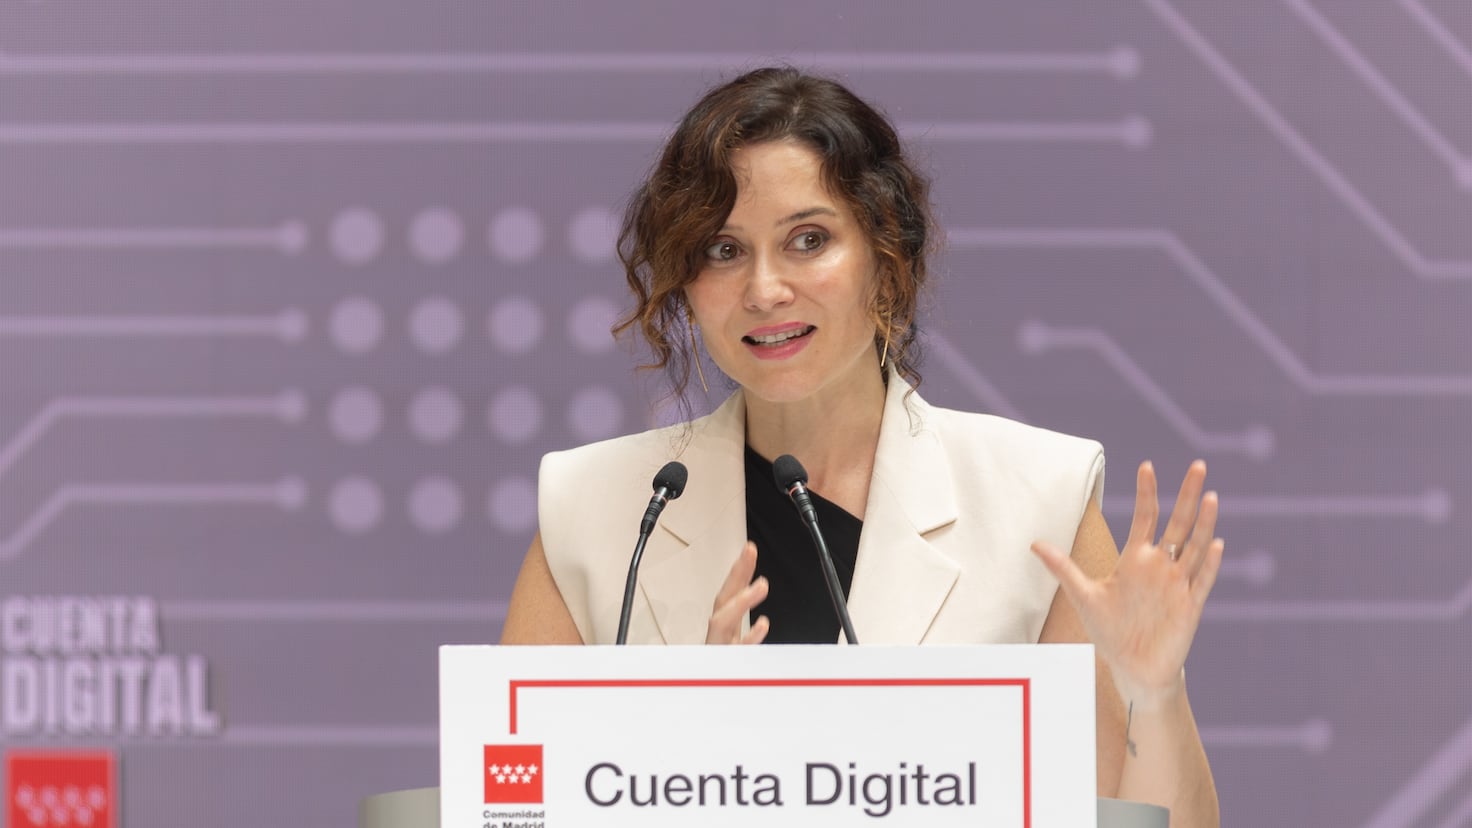 How Cuenta Digital works: the Community of Madrid app to manage more than 100 public services